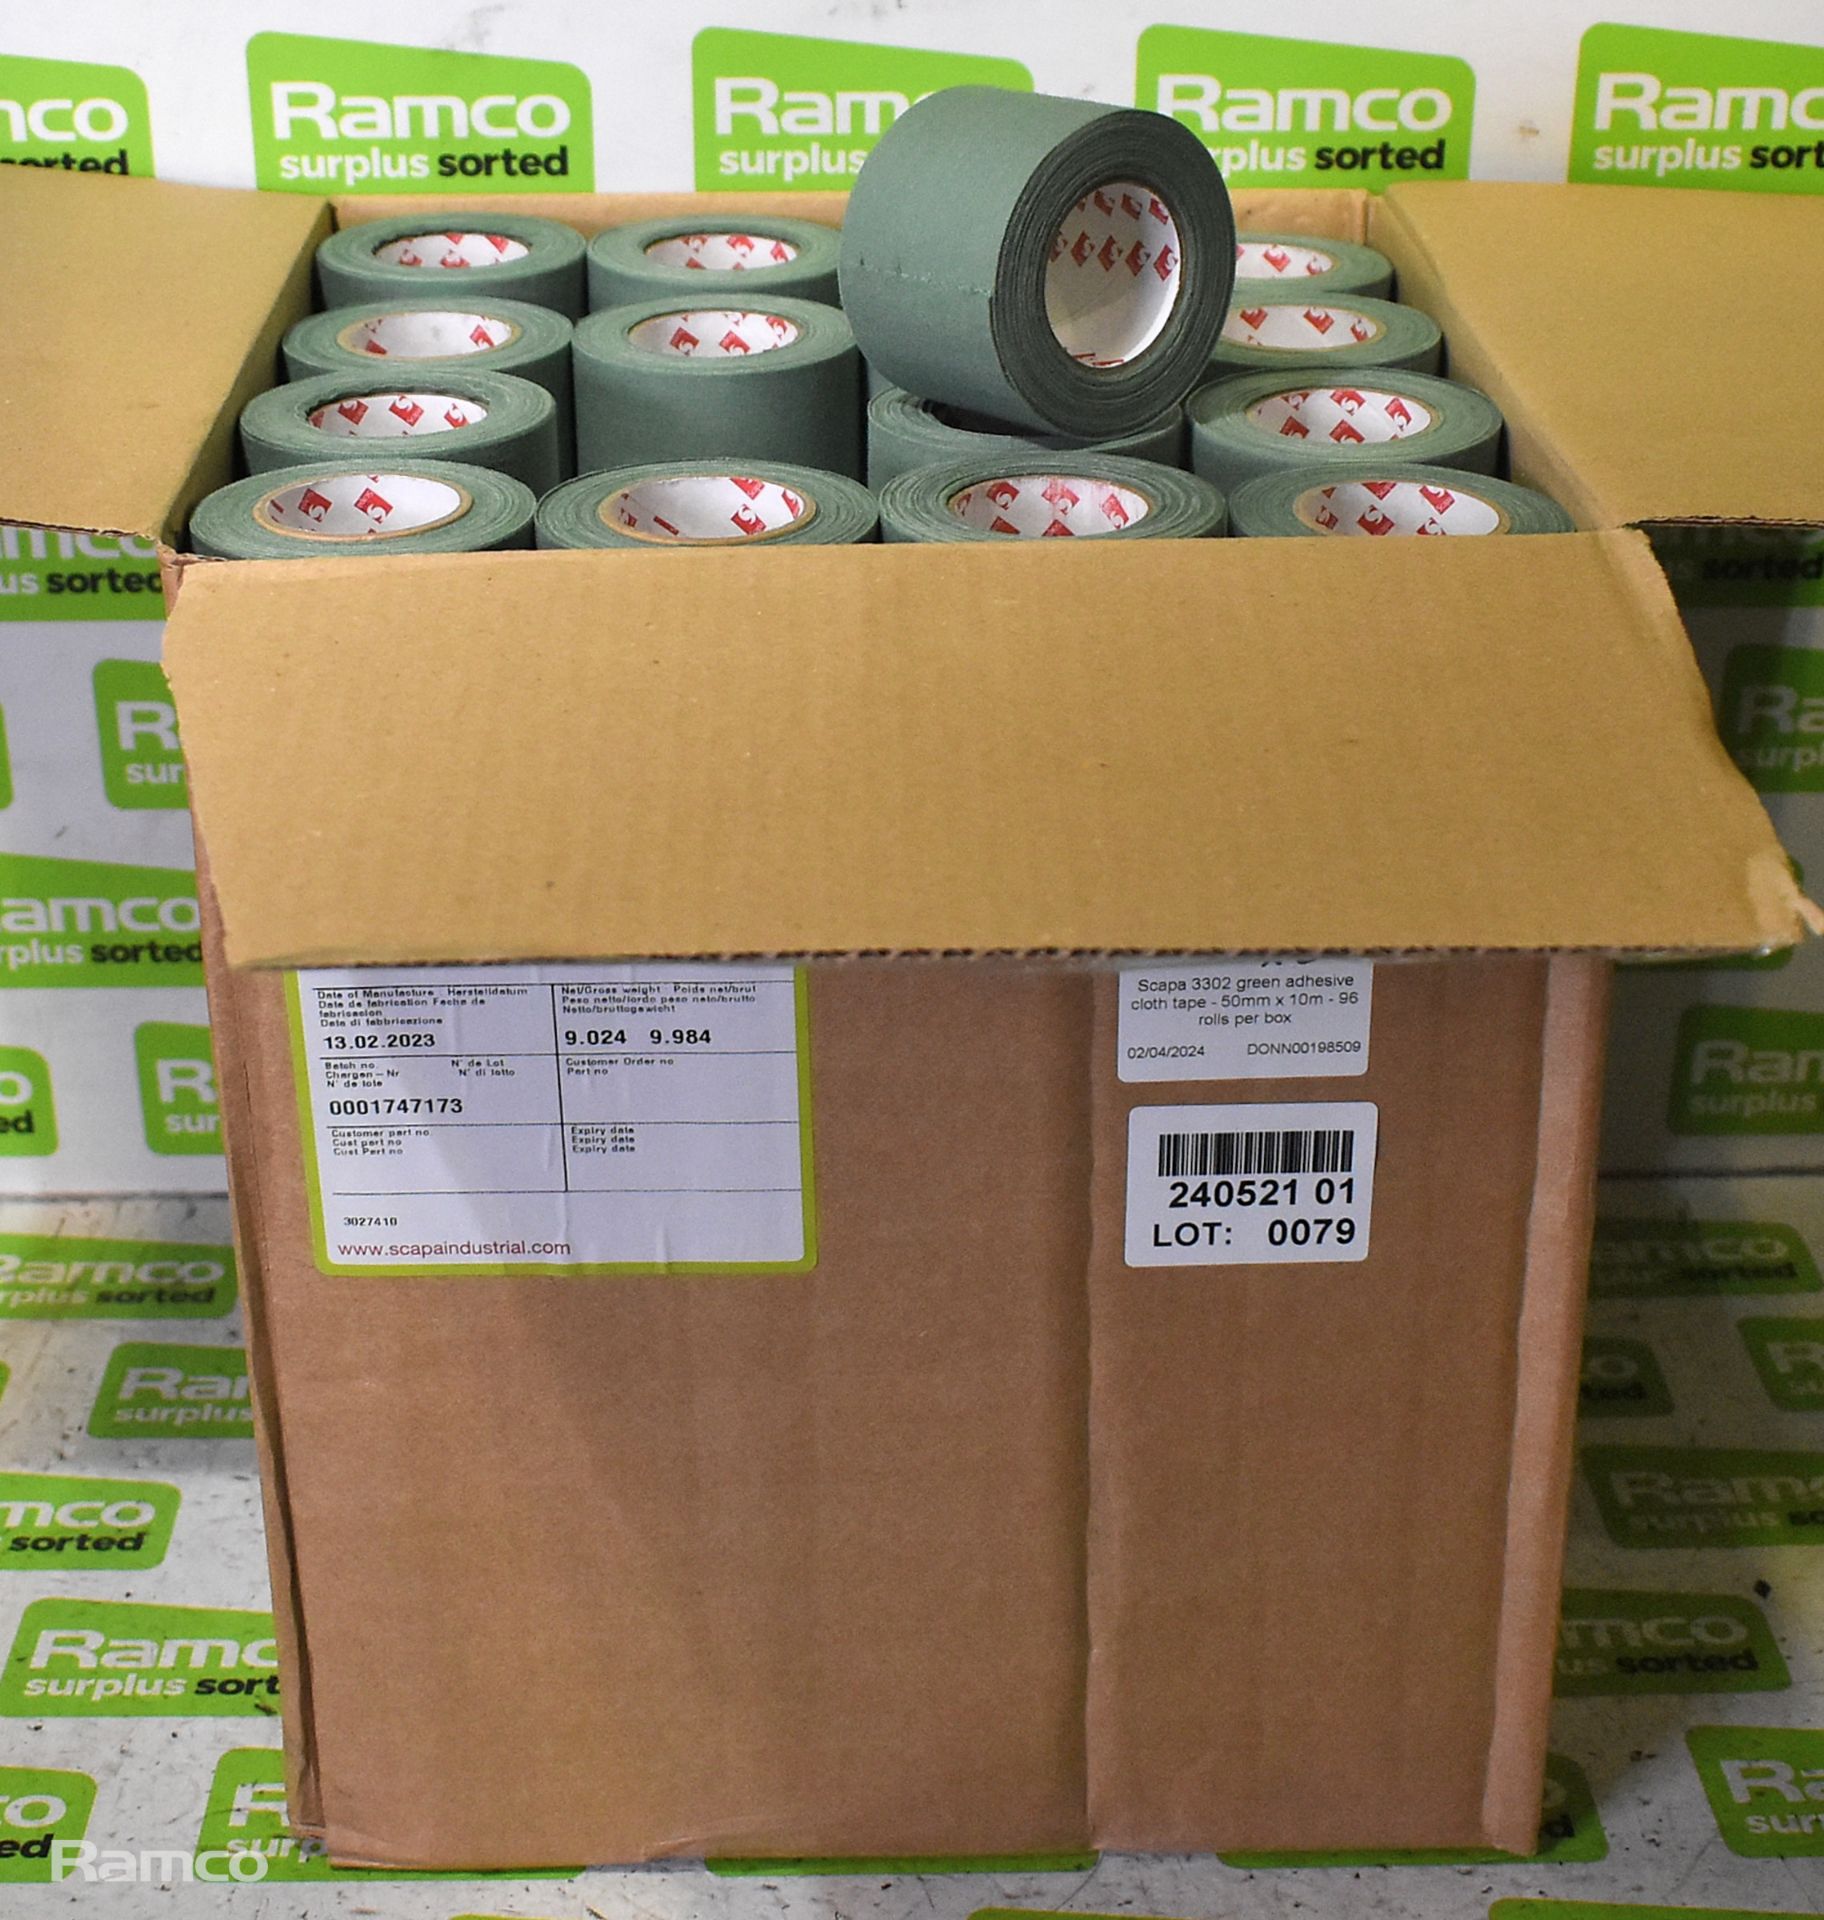 2x boxes of Scapa 3302 green adhesive cloth tape - 50mm x 10m - 96 rolls per box - Image 3 of 3